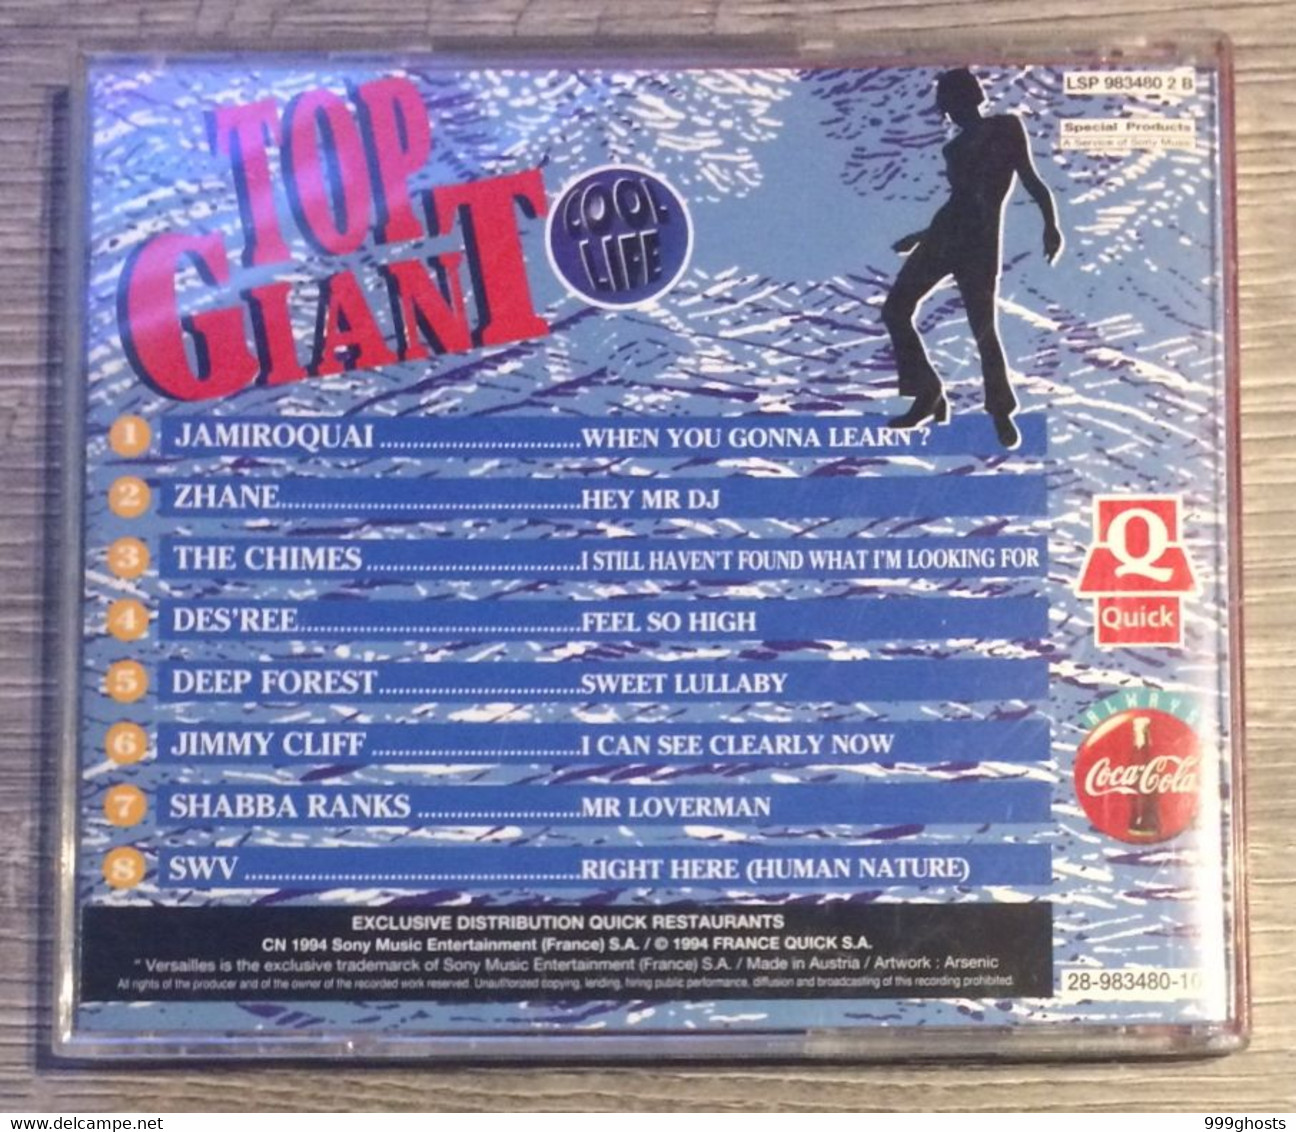 QUICK CD TOP GAINT (Case Damaged, CD Good) JAMIROQUAI SHABBA RANKS ZHANE JIMMY CLIFF DES'REE DEEP FOREST THE CHIMES SWV - Hit-Compilations